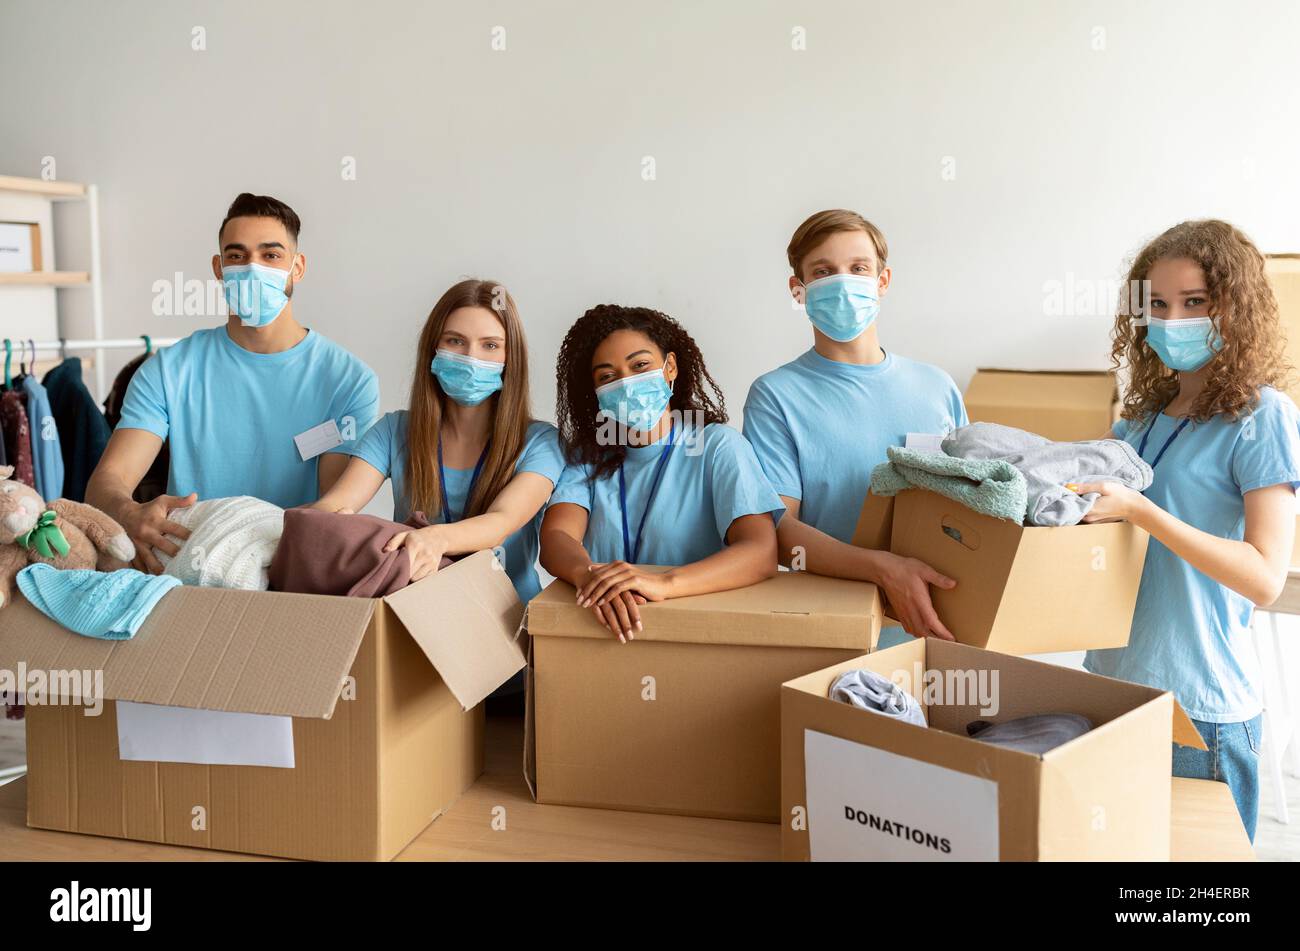 Homeless care concept. Young volunteers in medical face masks sorting clothing donations, working in charity center Stock Photo